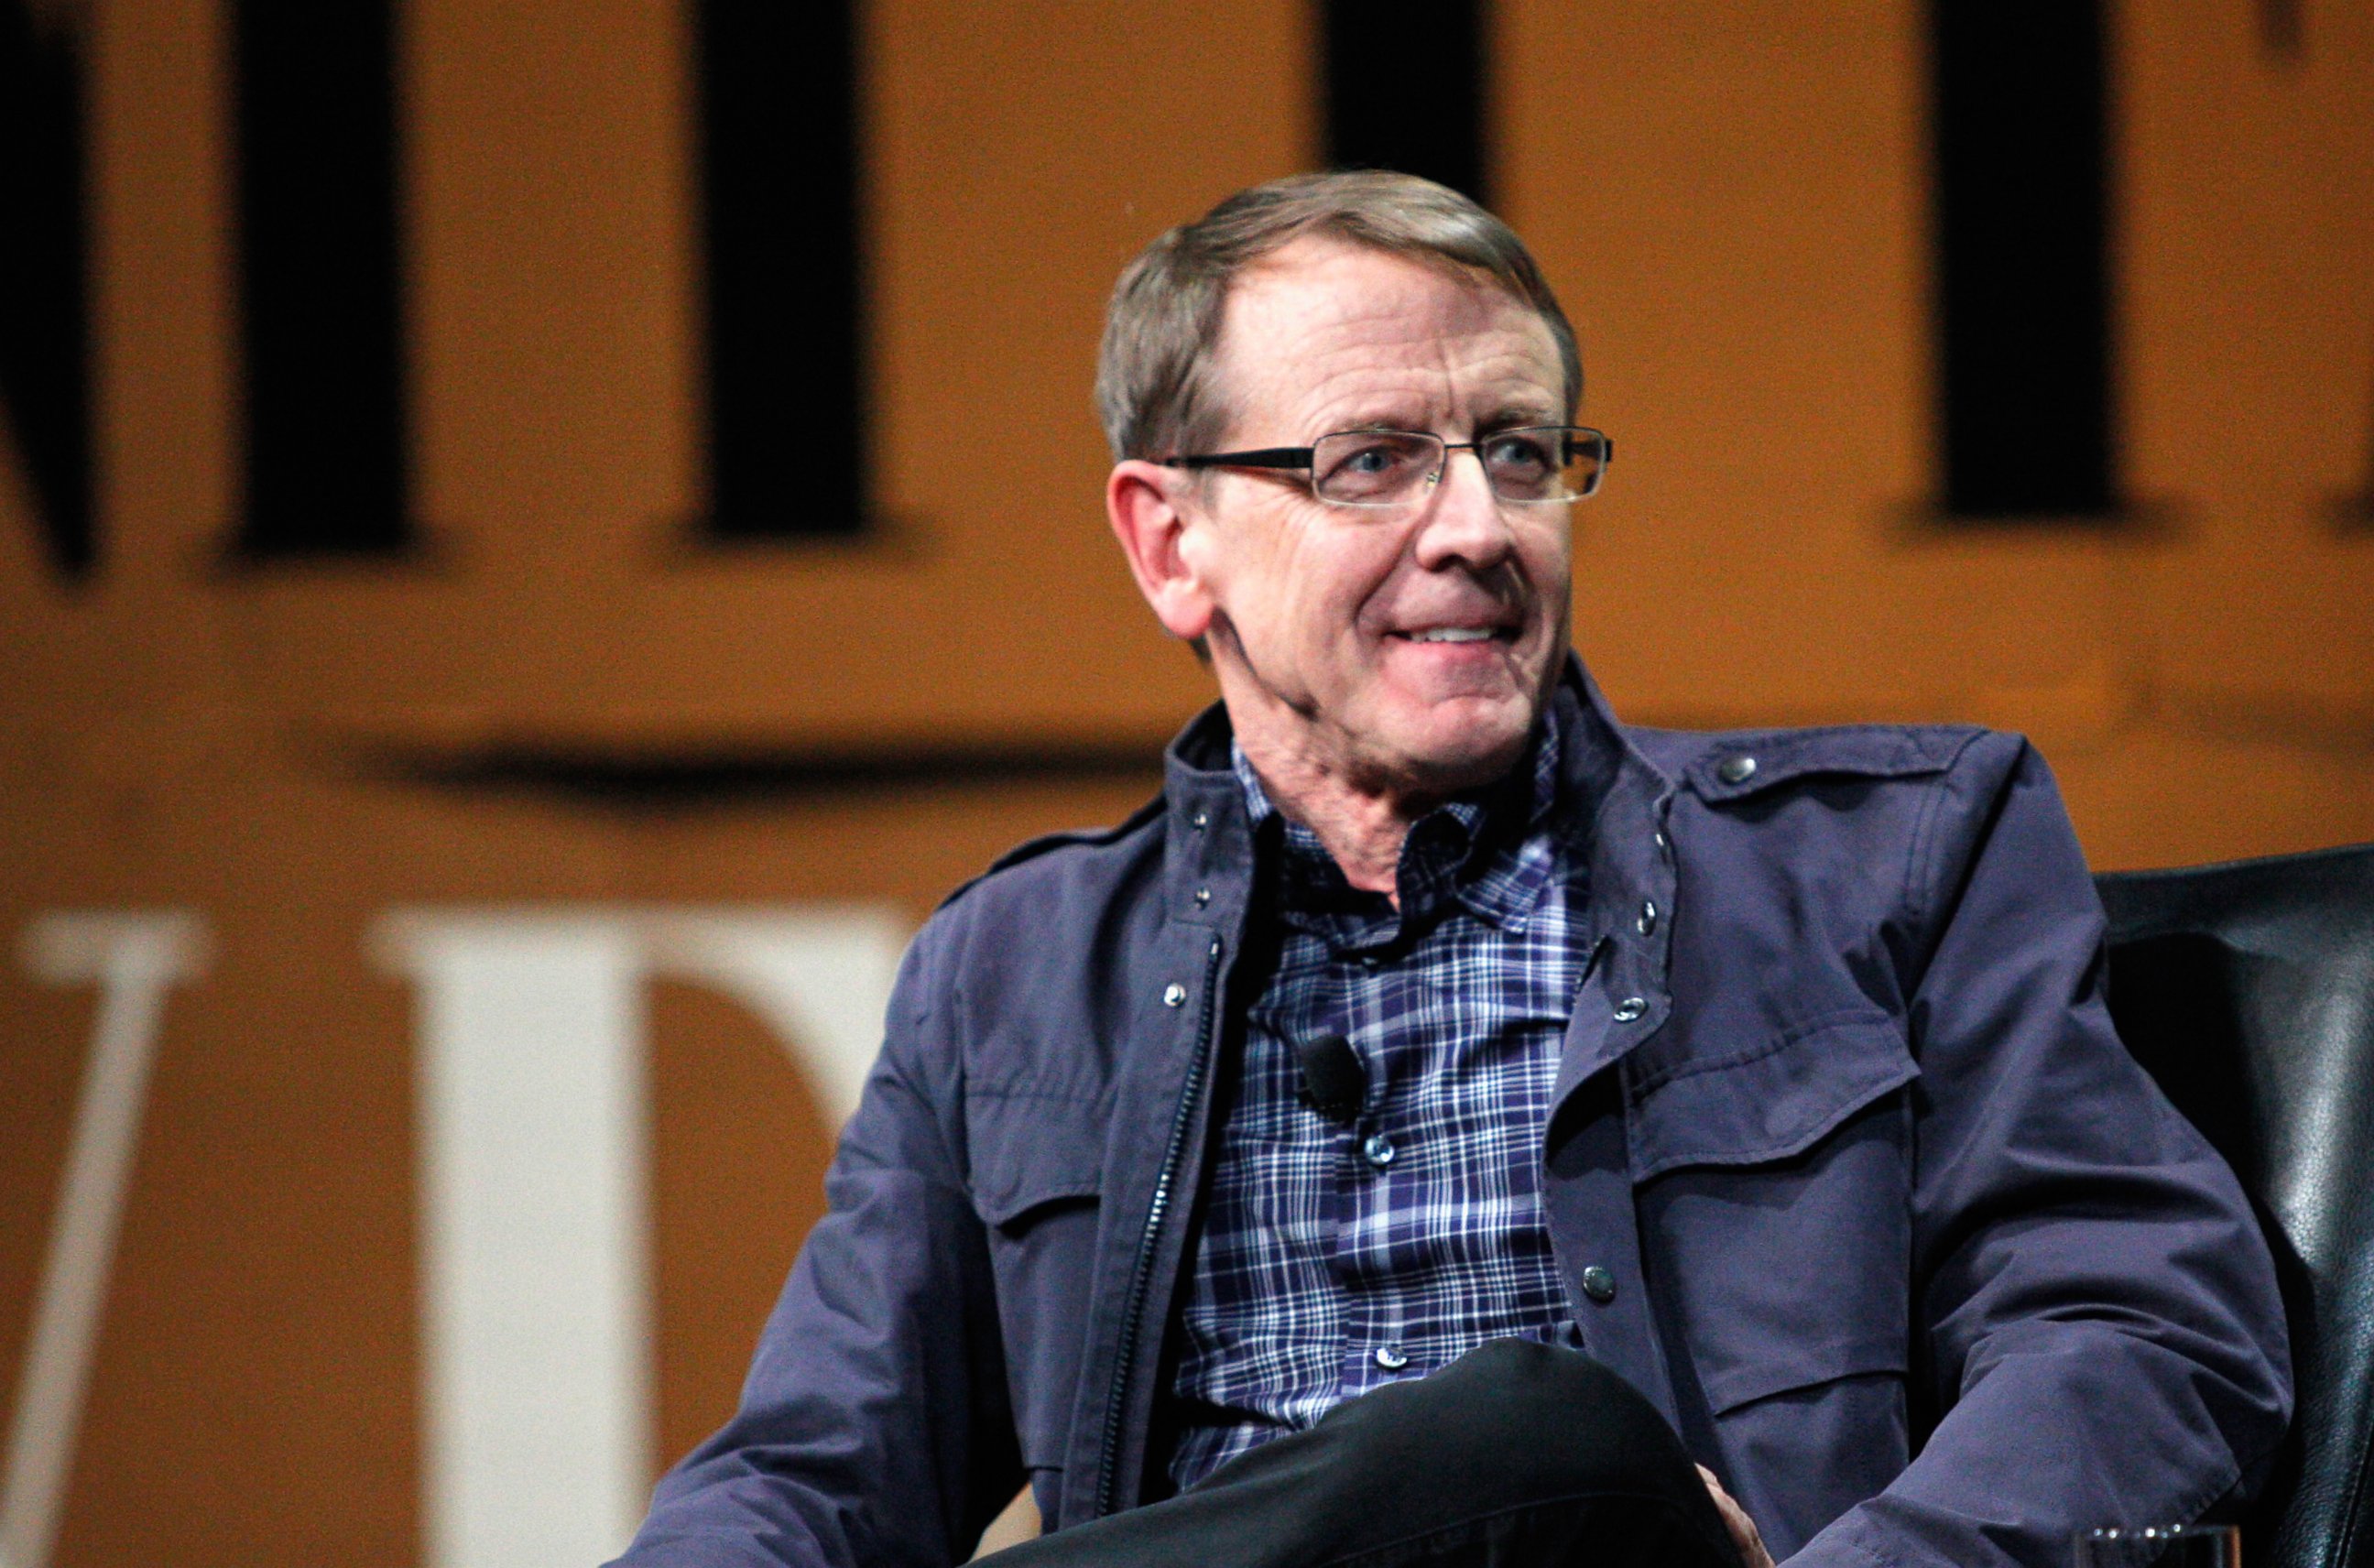 PHOTO: John Doerr speaks onstage during "Why Can't Tech Save Politics?" at the Vanity Fair New Establishment Summit at Yerba Buena Center for the Arts on Oct. 8, 2014 in San Francisco, Calif. 